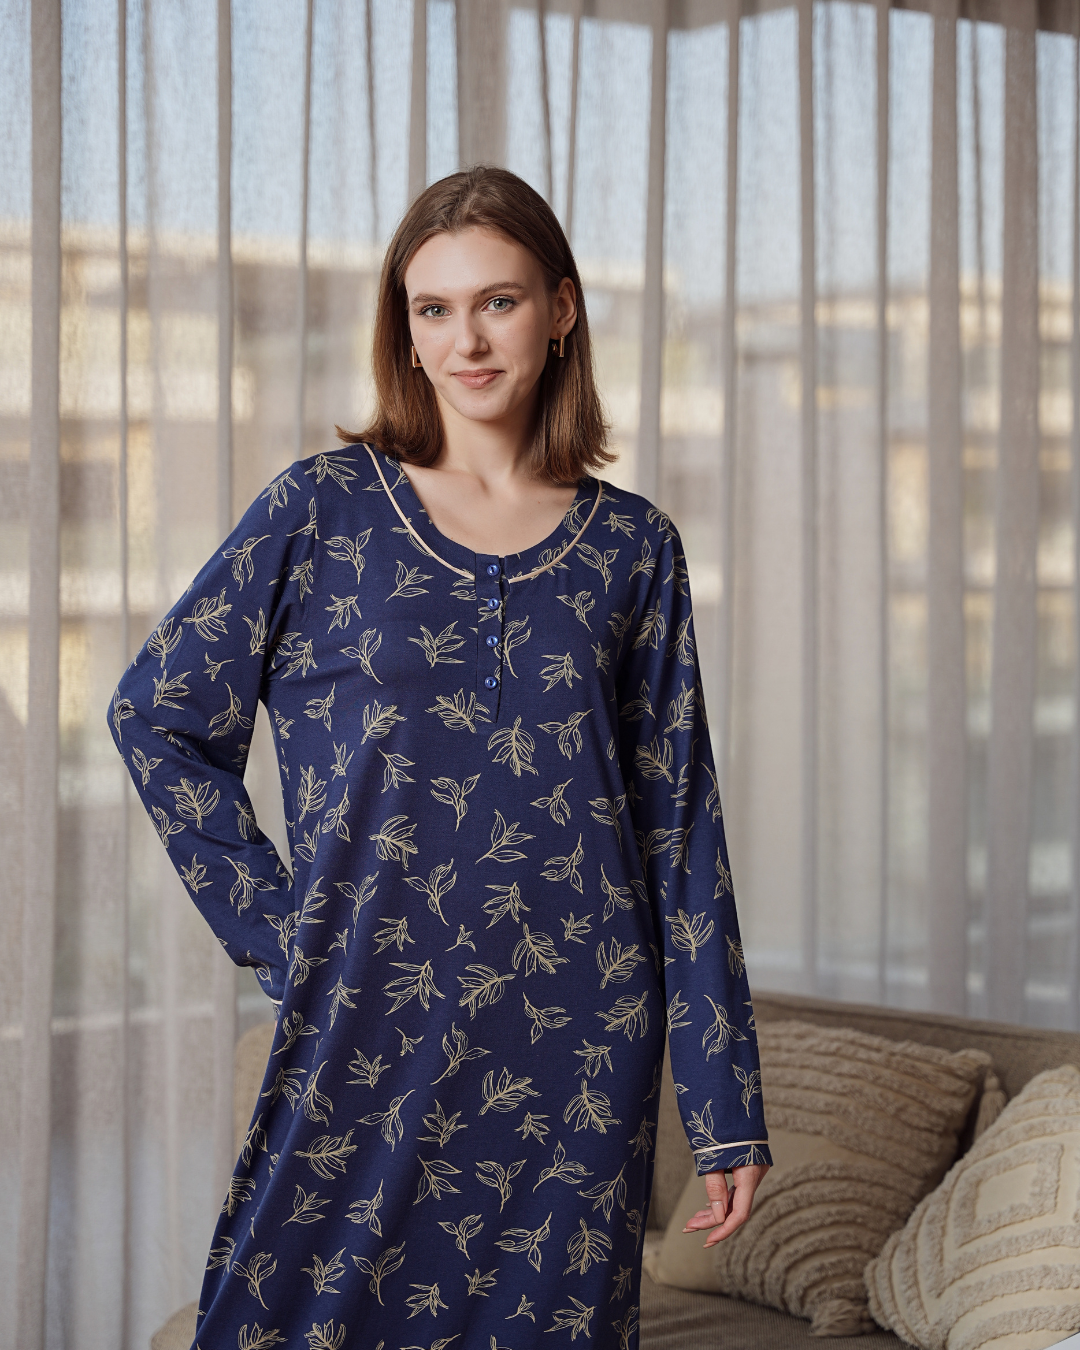 Women's shirt with leaf print